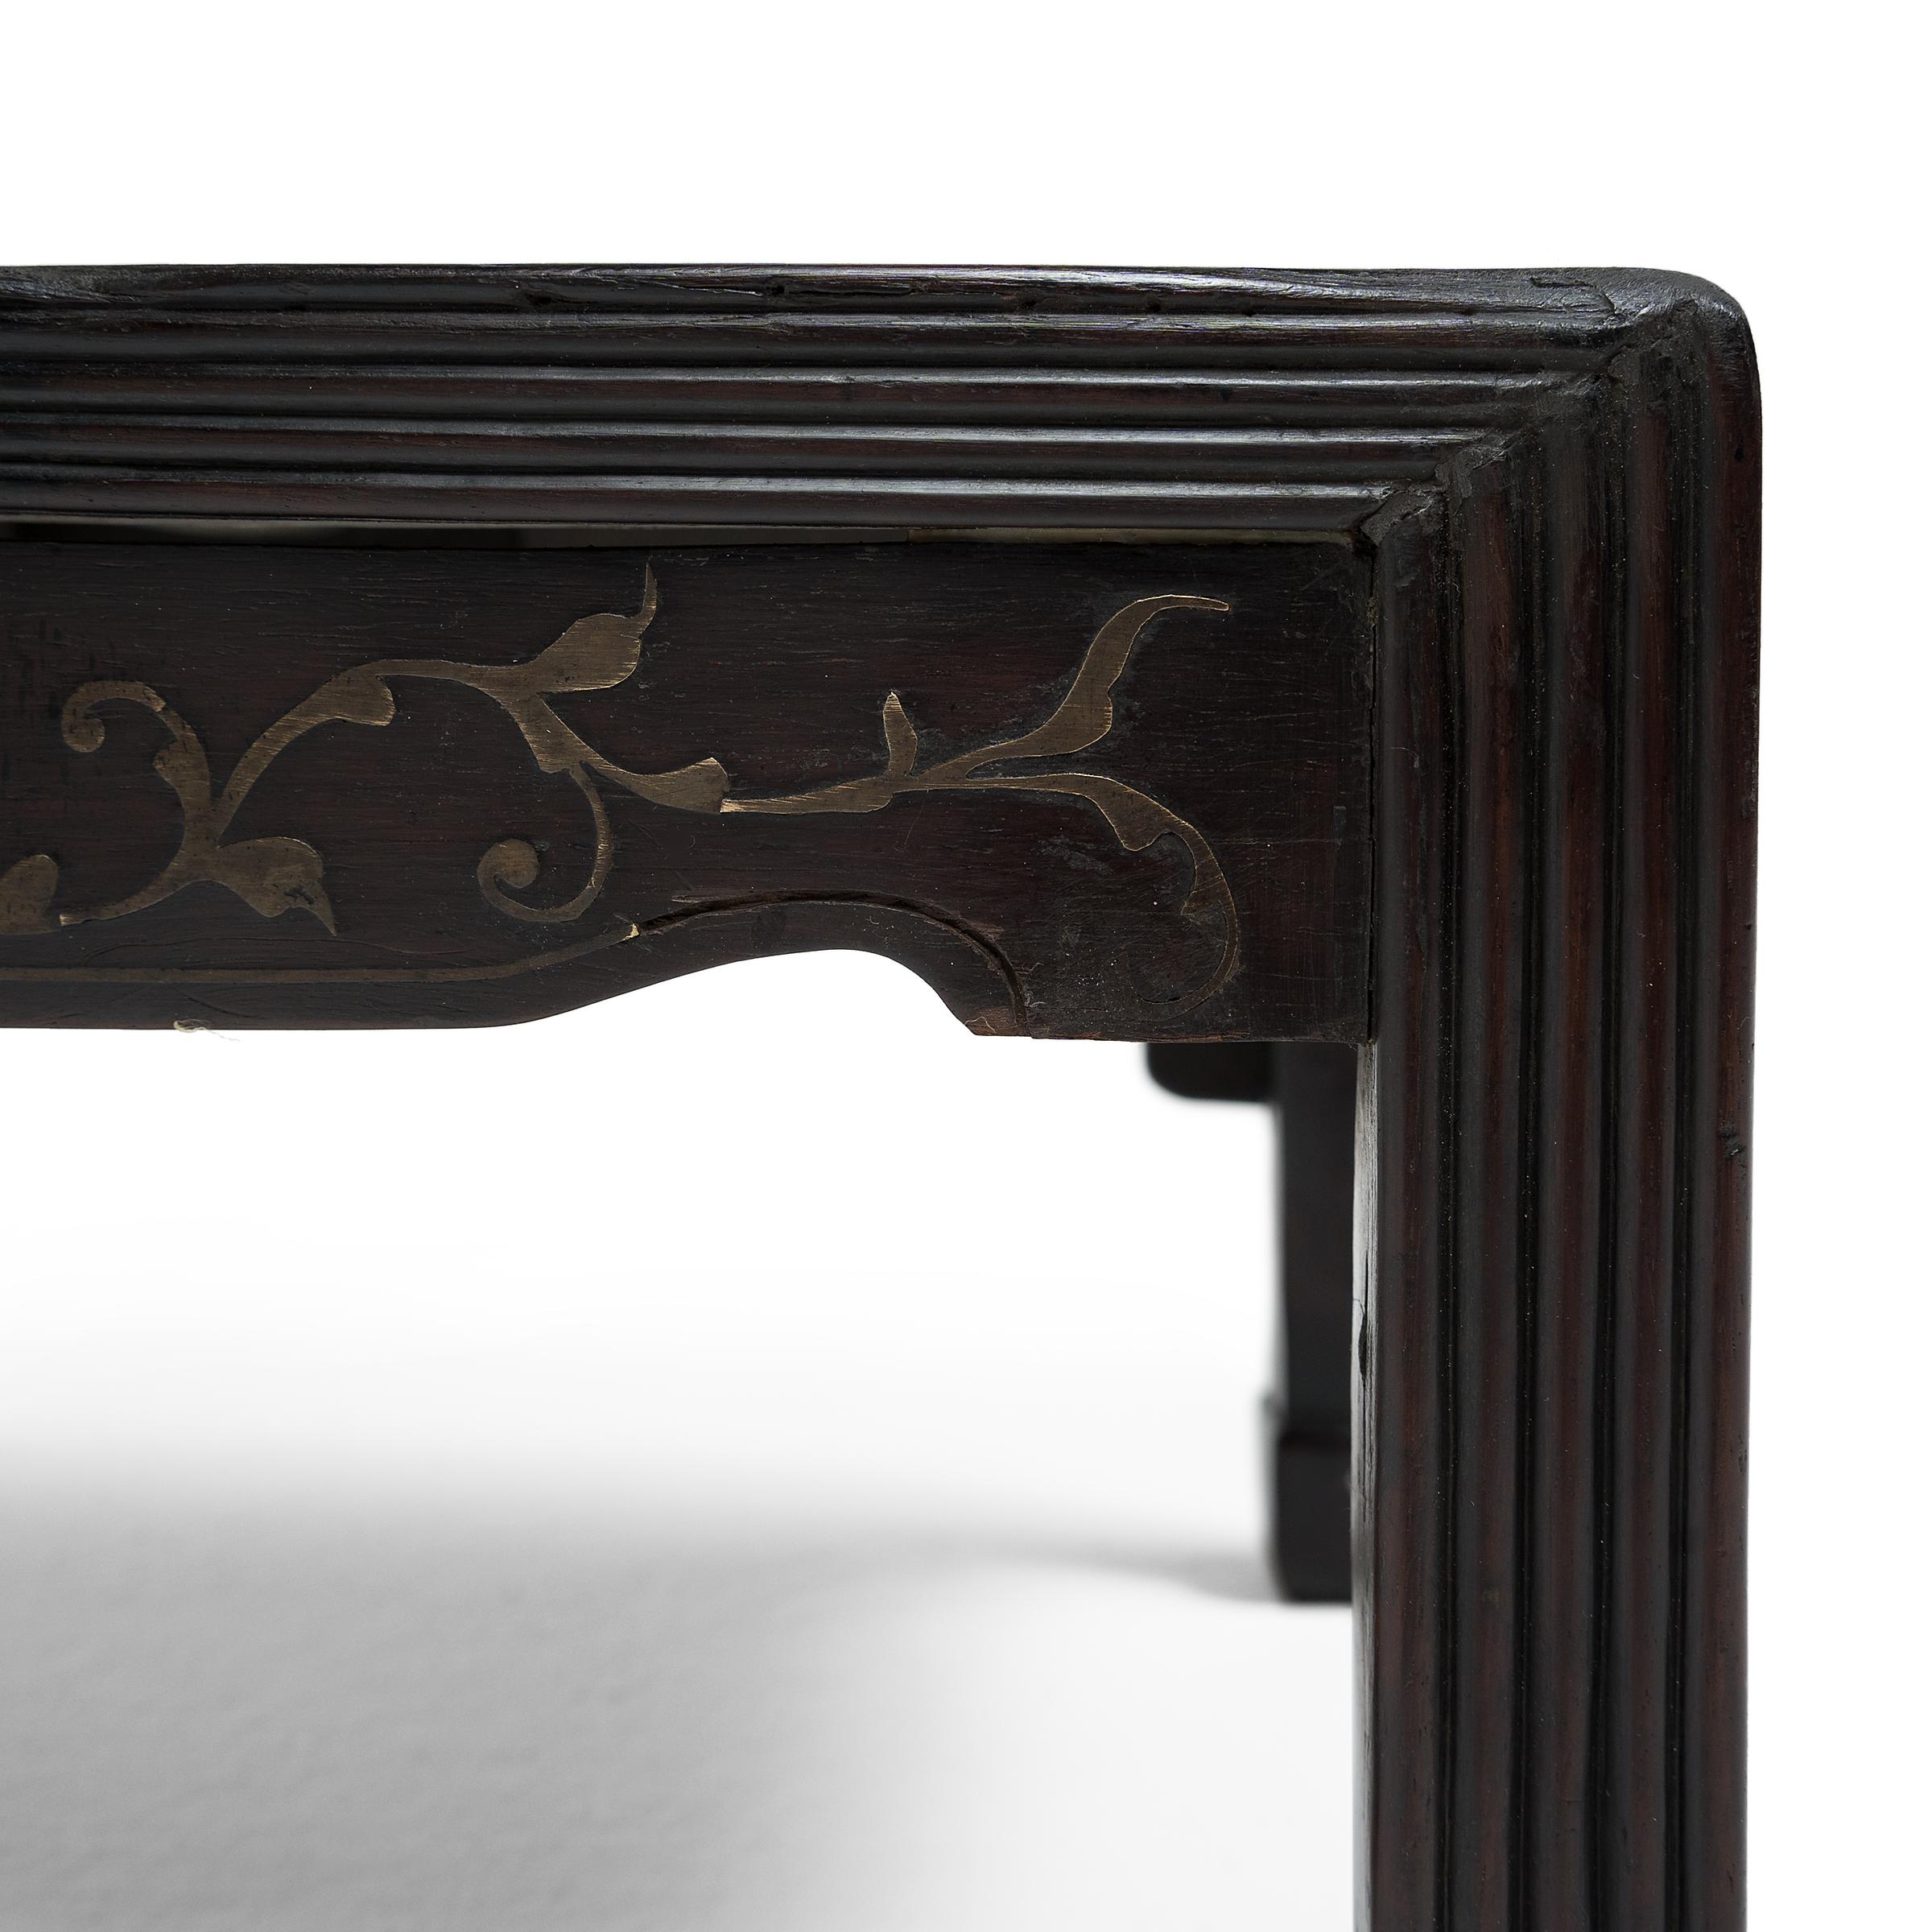 Carved Chinese Kang Table with Ridged Legs, c. 1800 For Sale